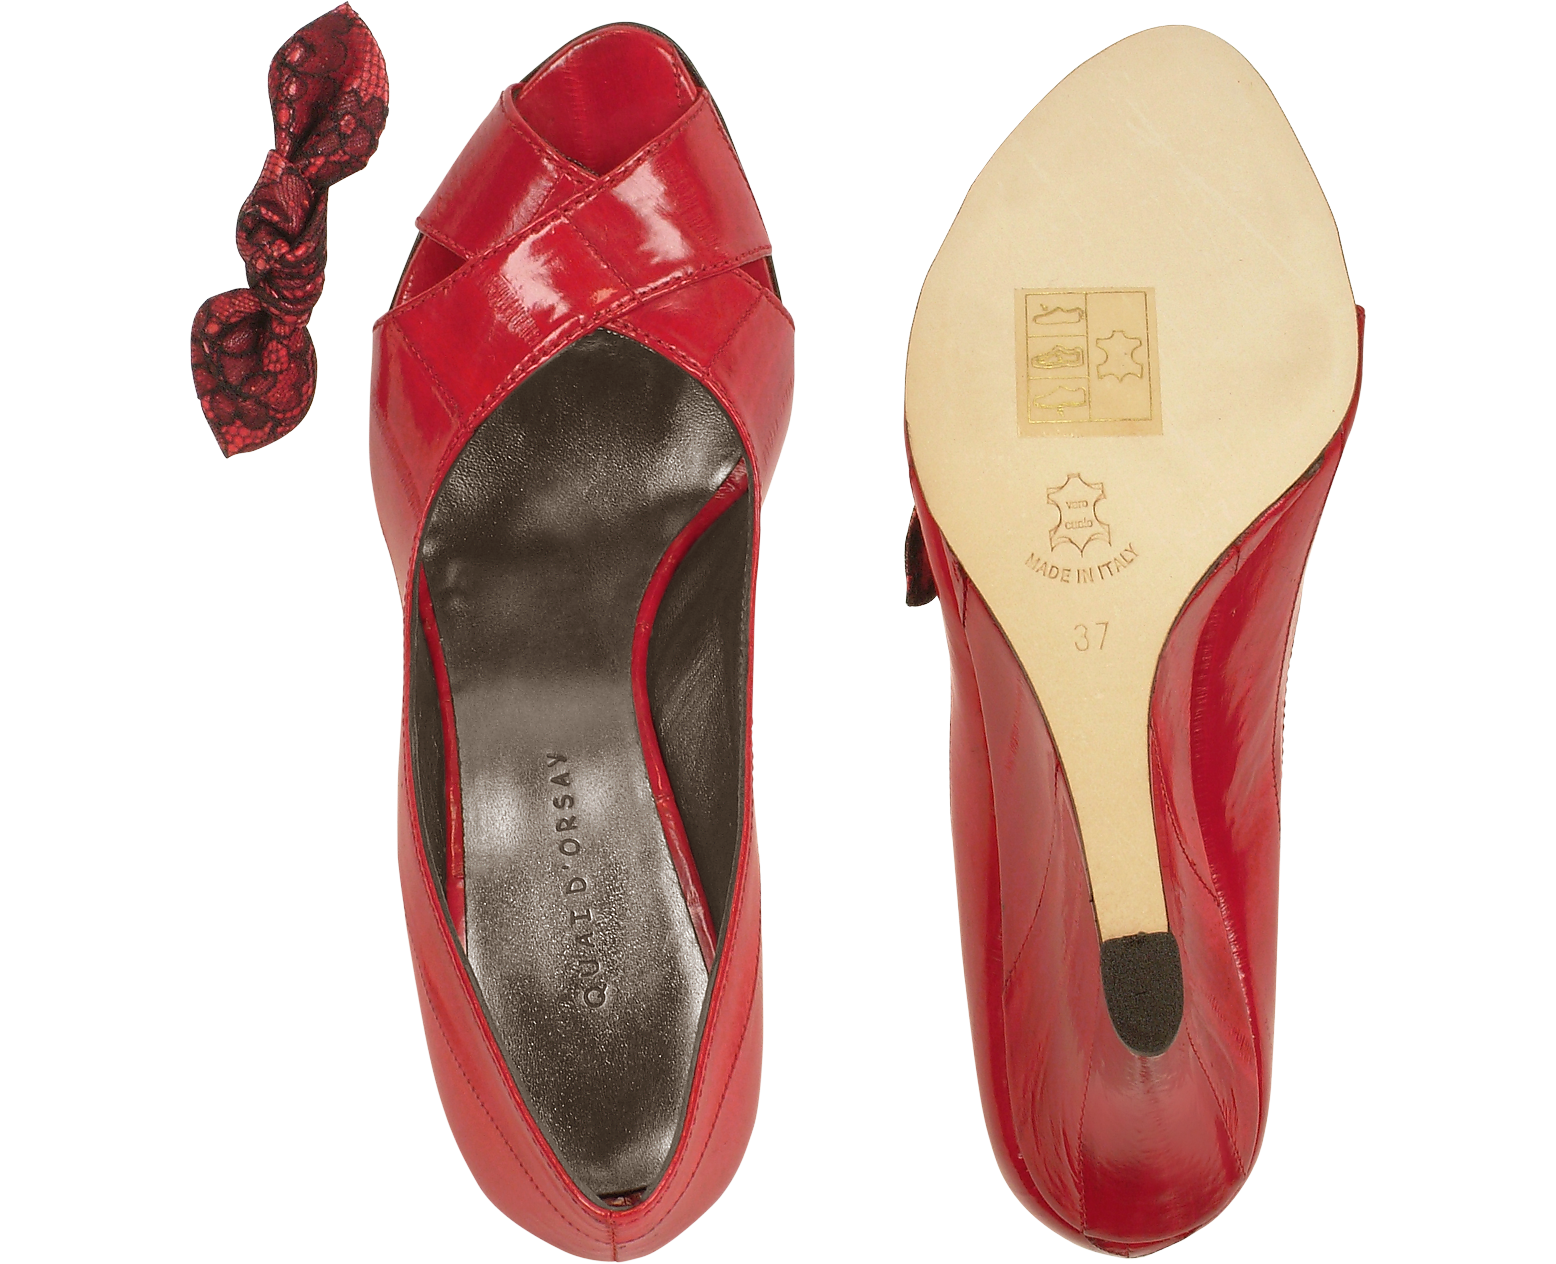 Quai D'Orsay Lace Bow Red Heel Leather Peep Toe Wedge Shoes 6 US | 3.5 ...